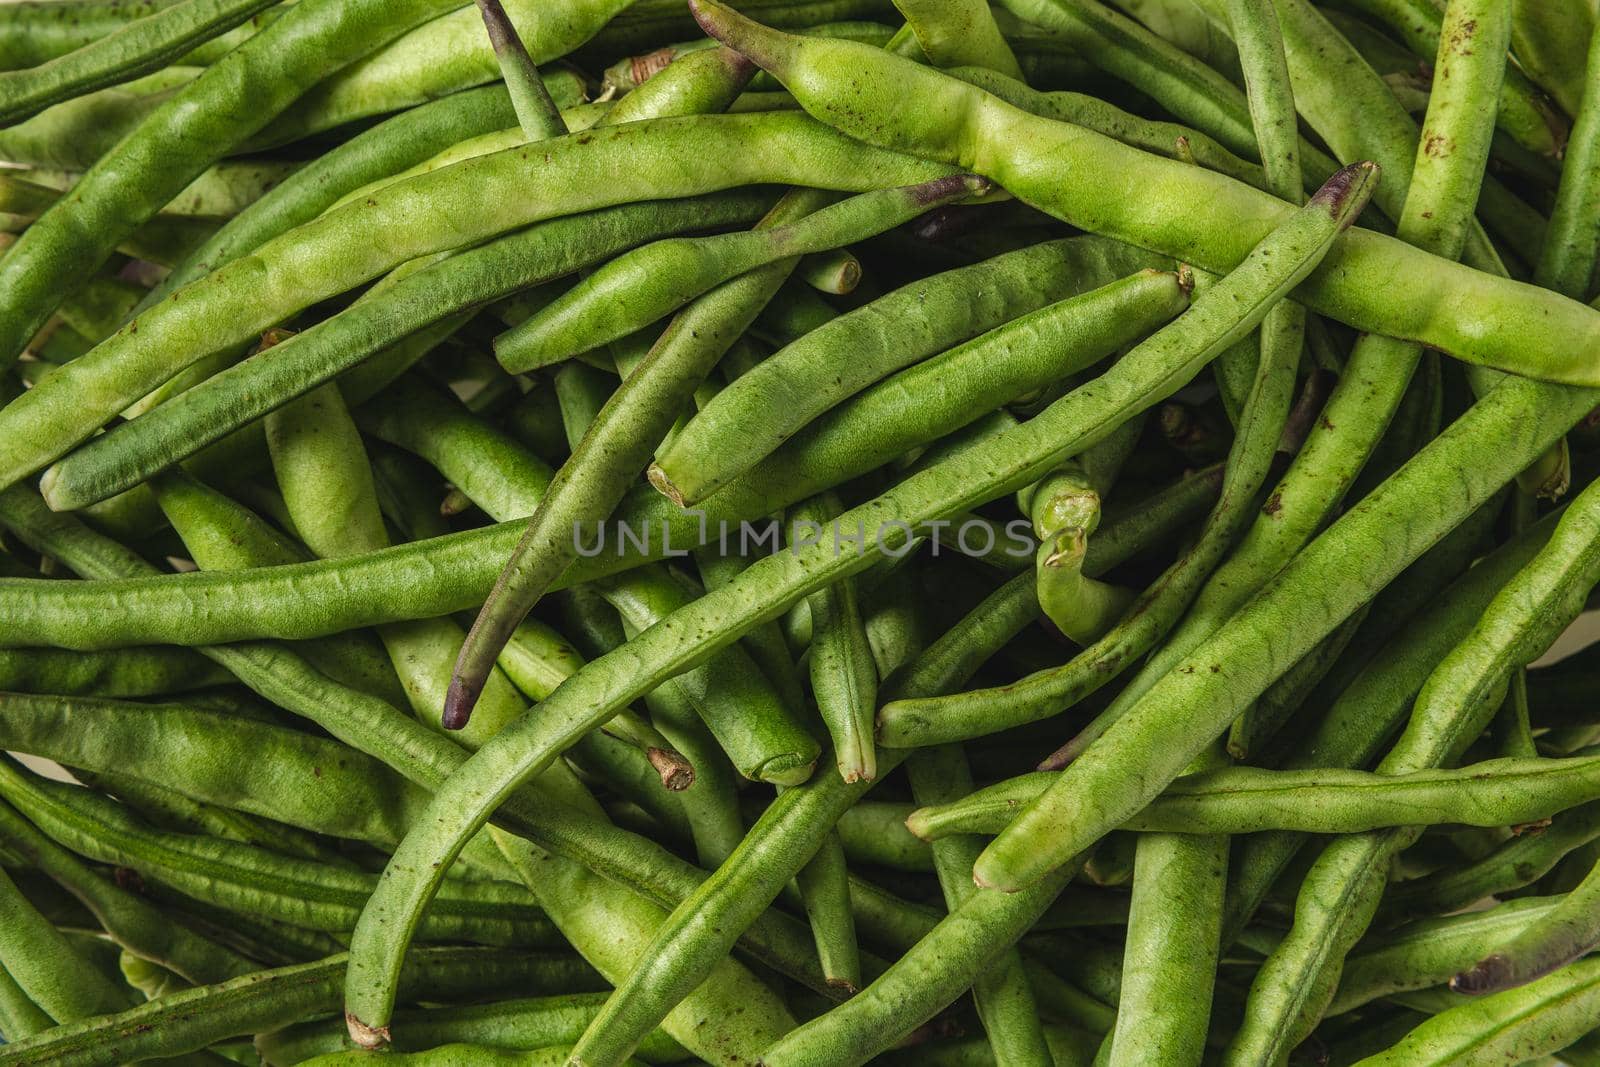 Fresh green beans in a glass bowl. Healthy eating concept by Sonat